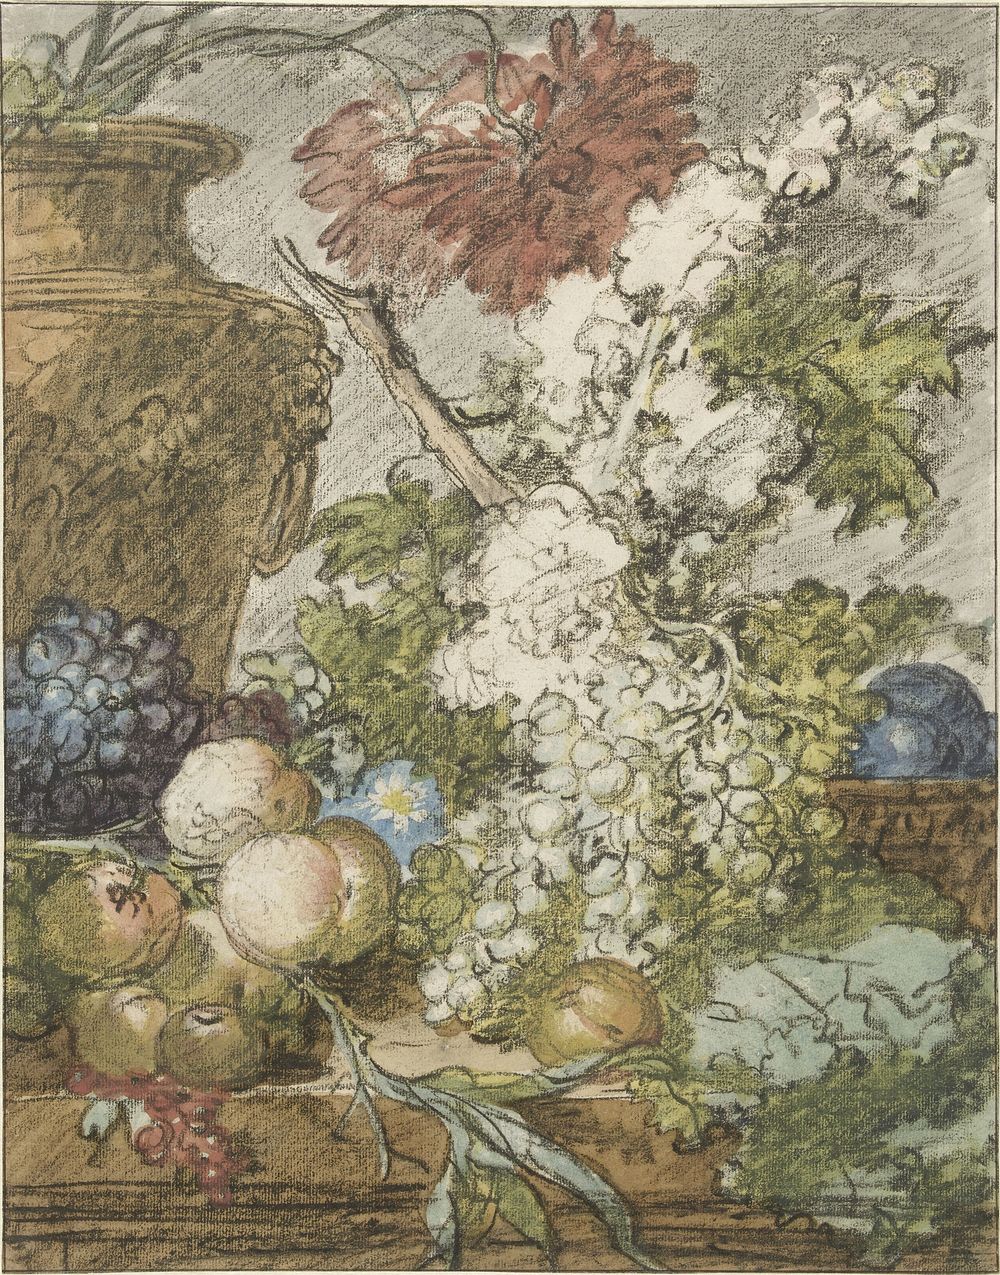 Sketch for a Still Life of Fruit and Flowers (c. 1725 - c. 1735) by Jan van Huysum